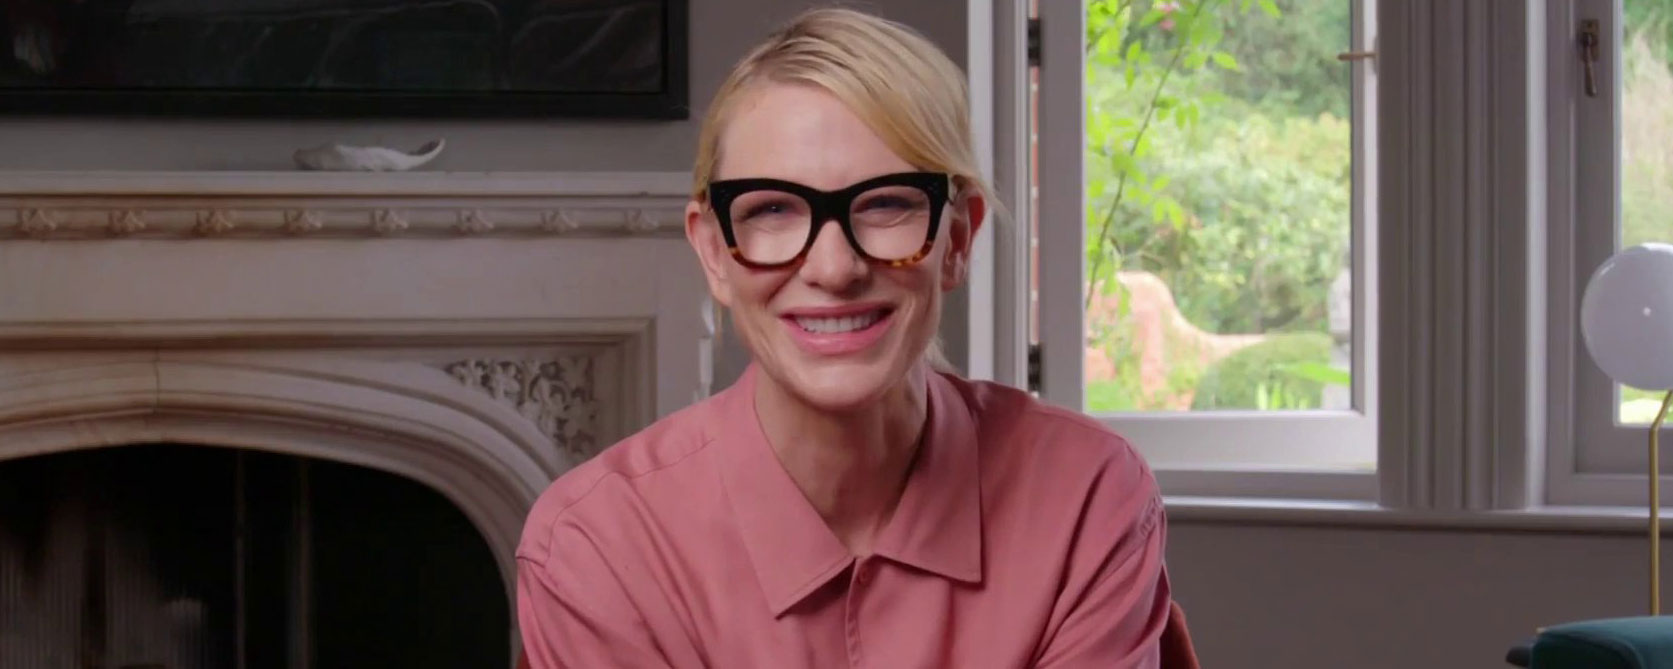 Cate Blanchett’s Desert Palm Achievement; on Eurythmics, Governor Awards photos, TÁR interview & upcoming appearances